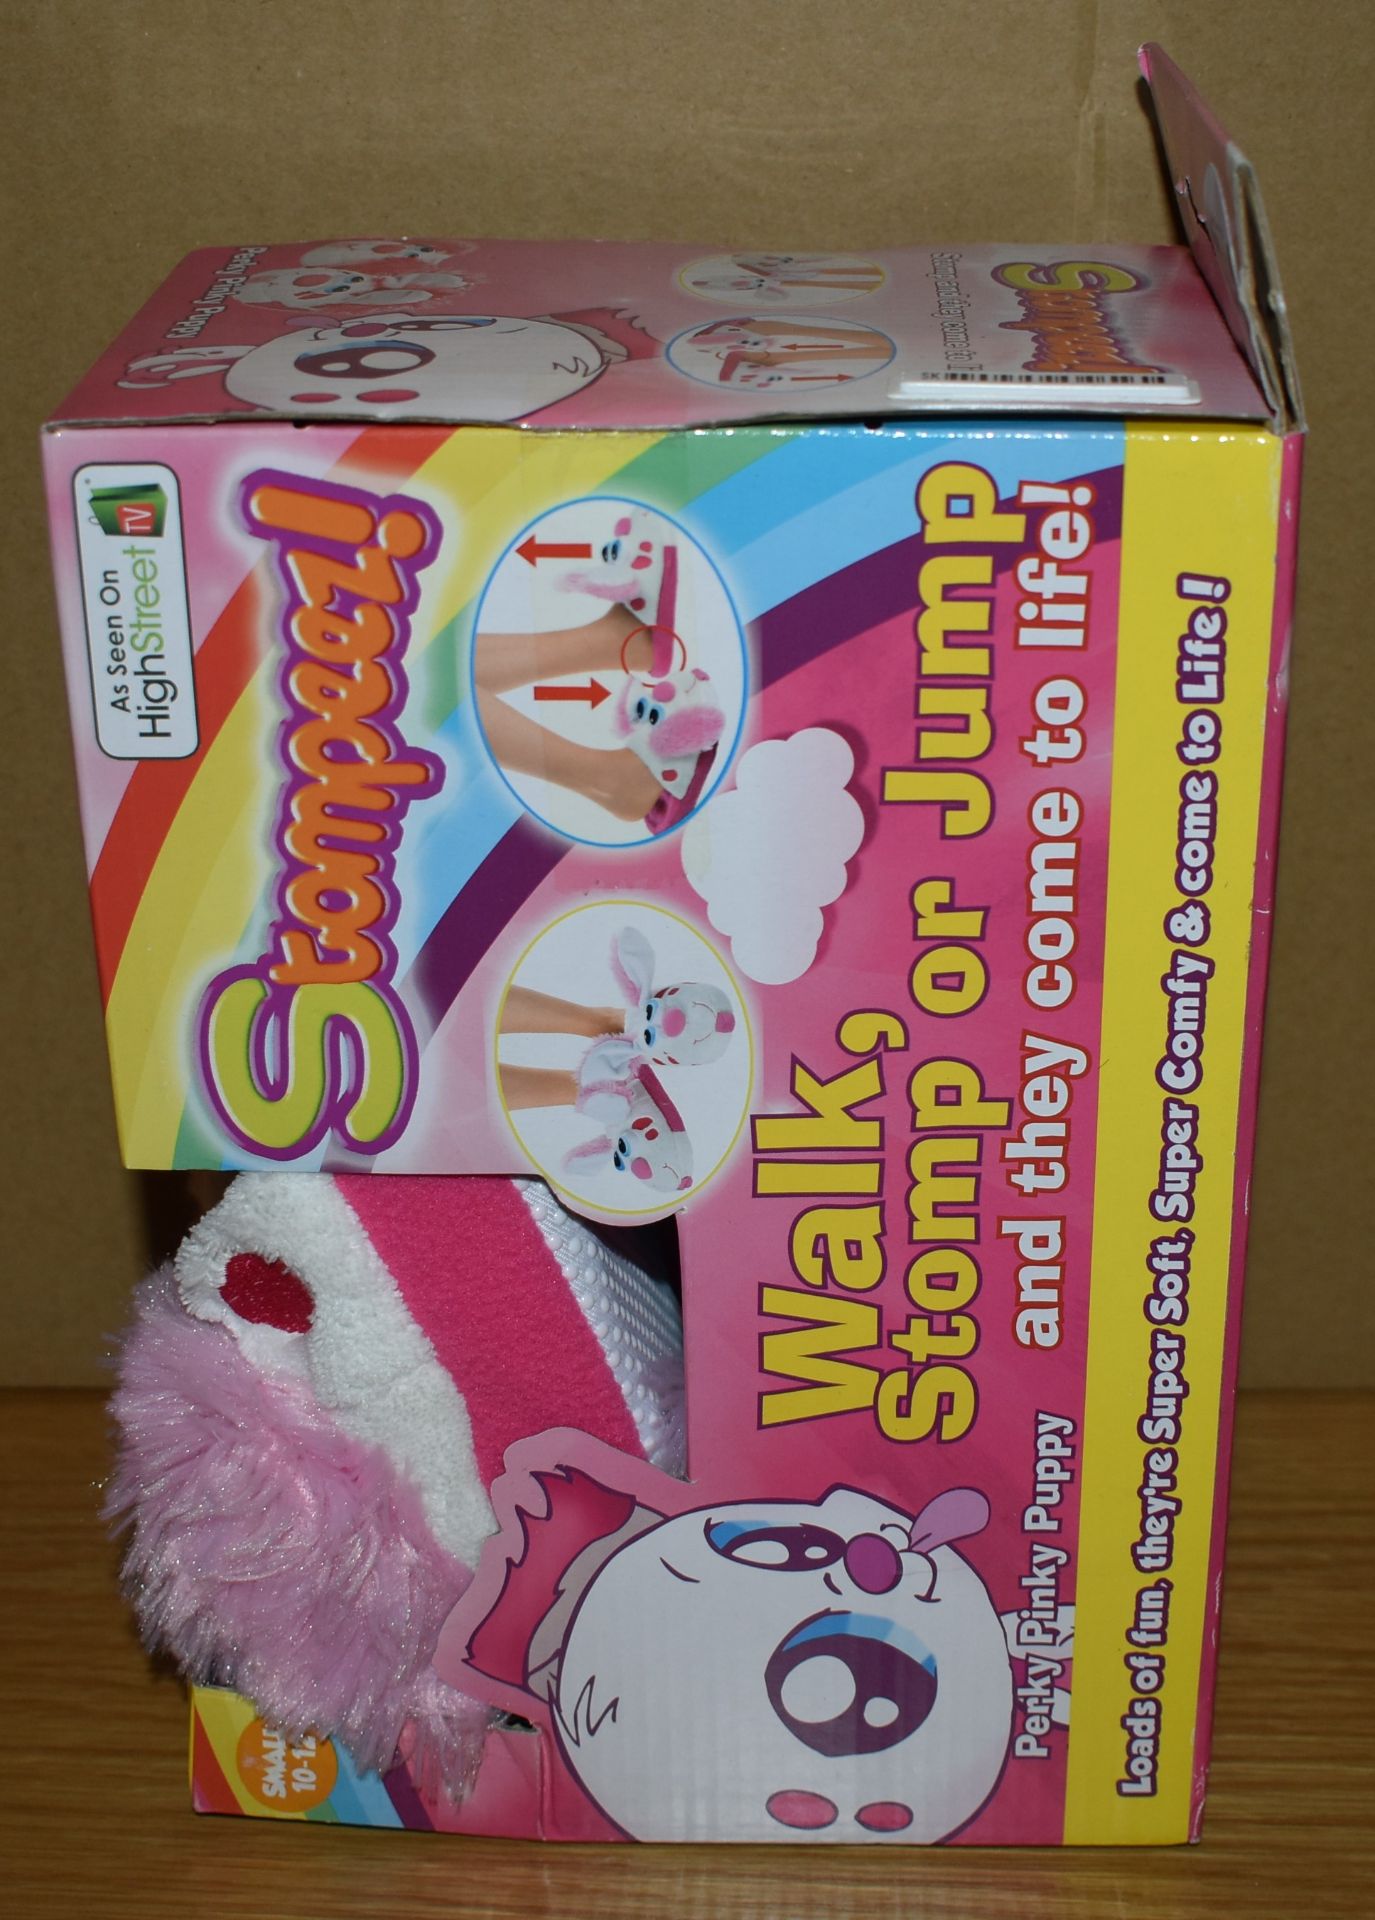 25 x Stompeez Pink Perky Puppy Slippers - Fleece Slip-On Children's Slippers - Size Small 10 to 12 - - Image 3 of 10